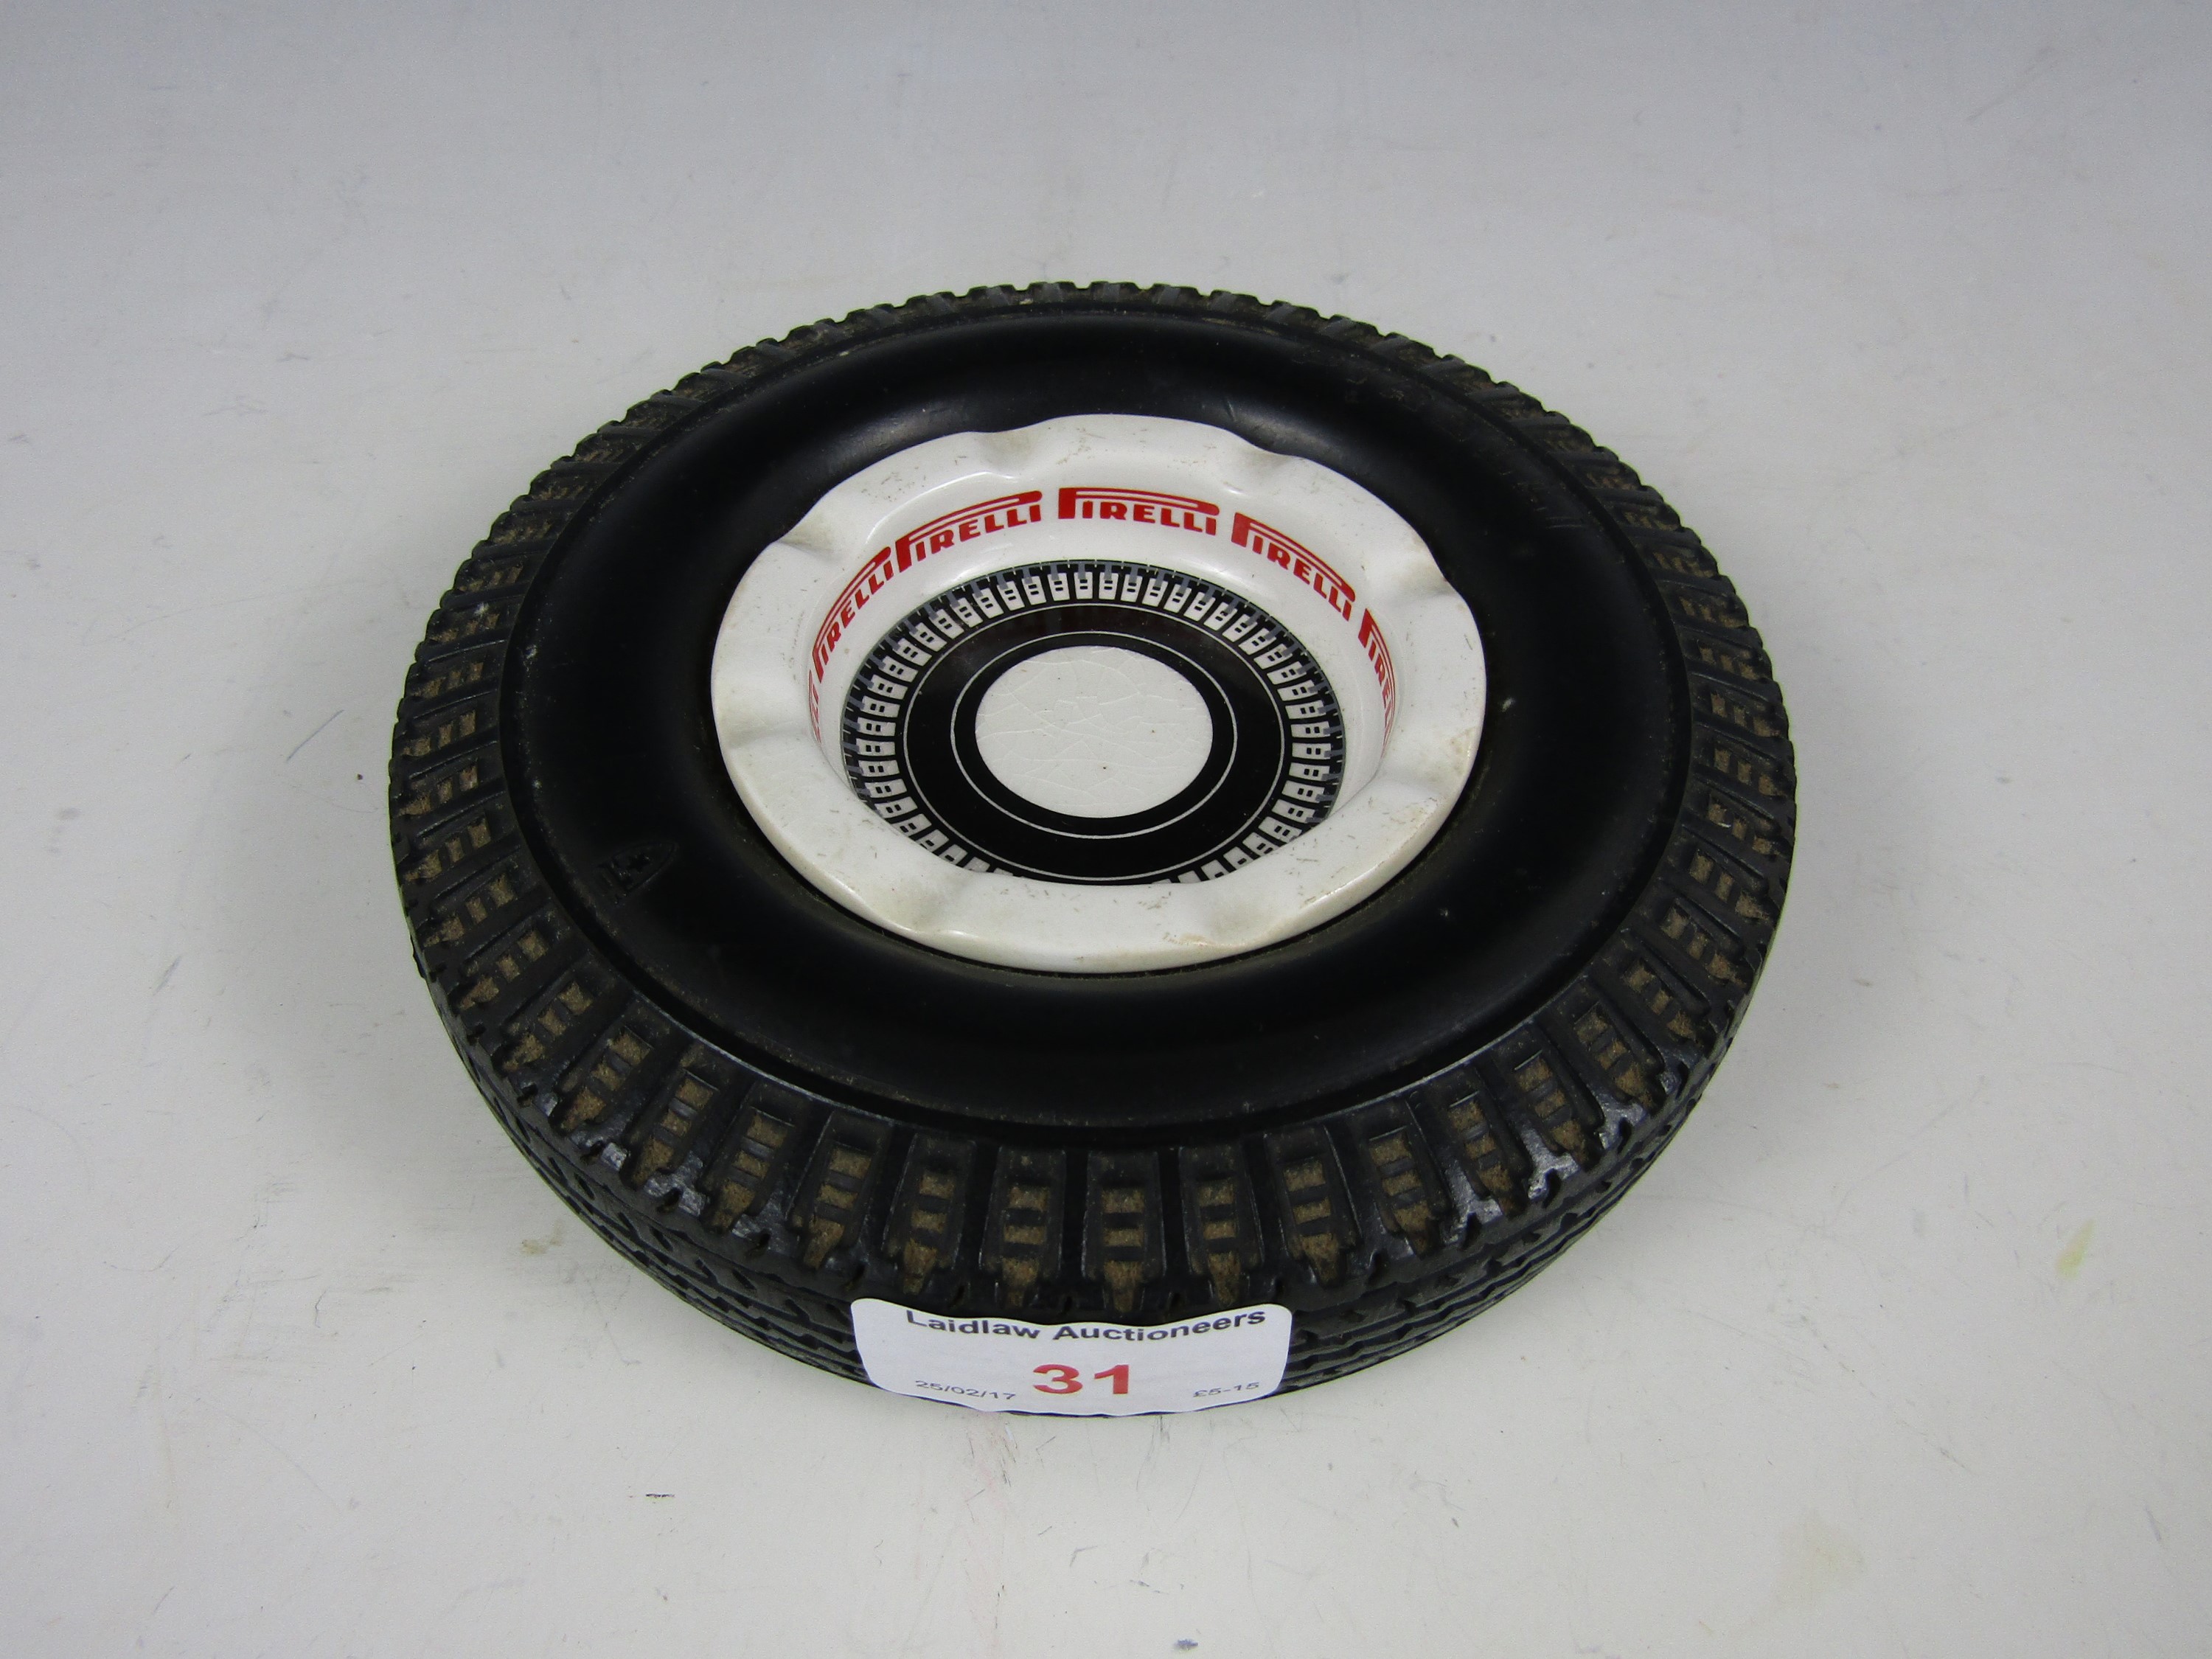 A T.G. Green Gresley ware 1960's Pirelli advertising tyre ashtray